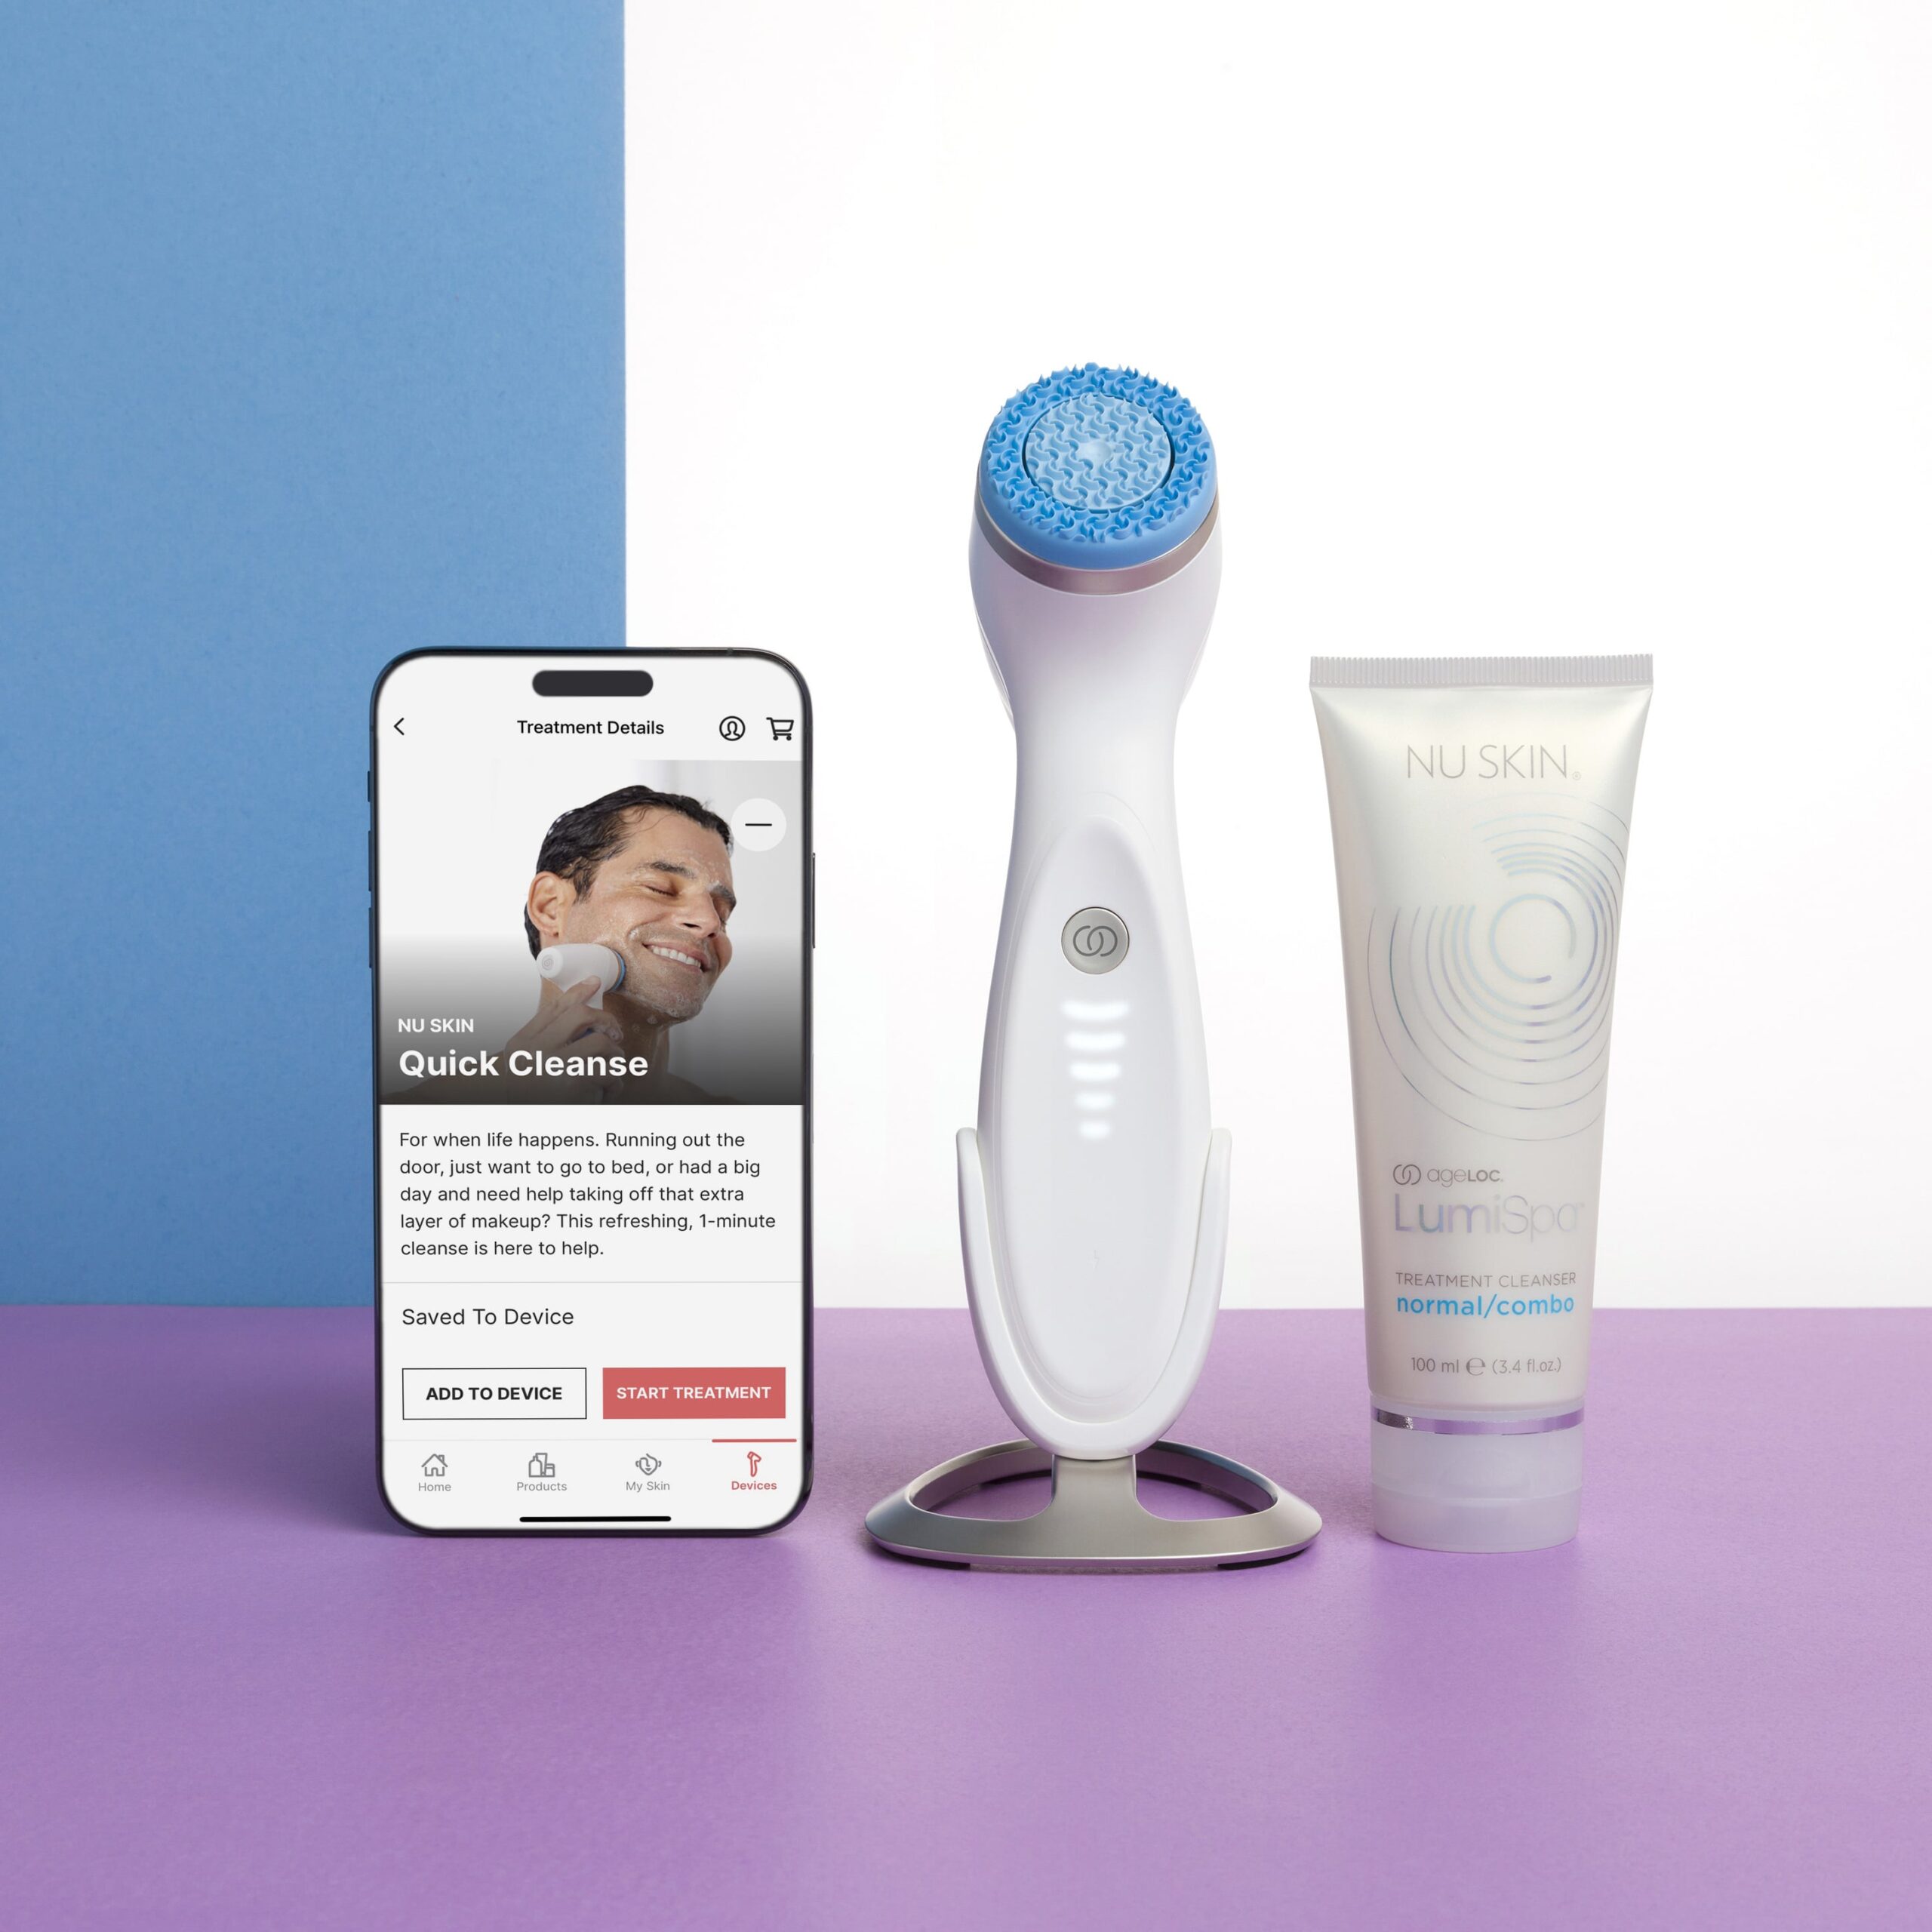 Nu Skin Introduces the Next Generation of Smart Skin Care with ageLOC LumiSpa iO